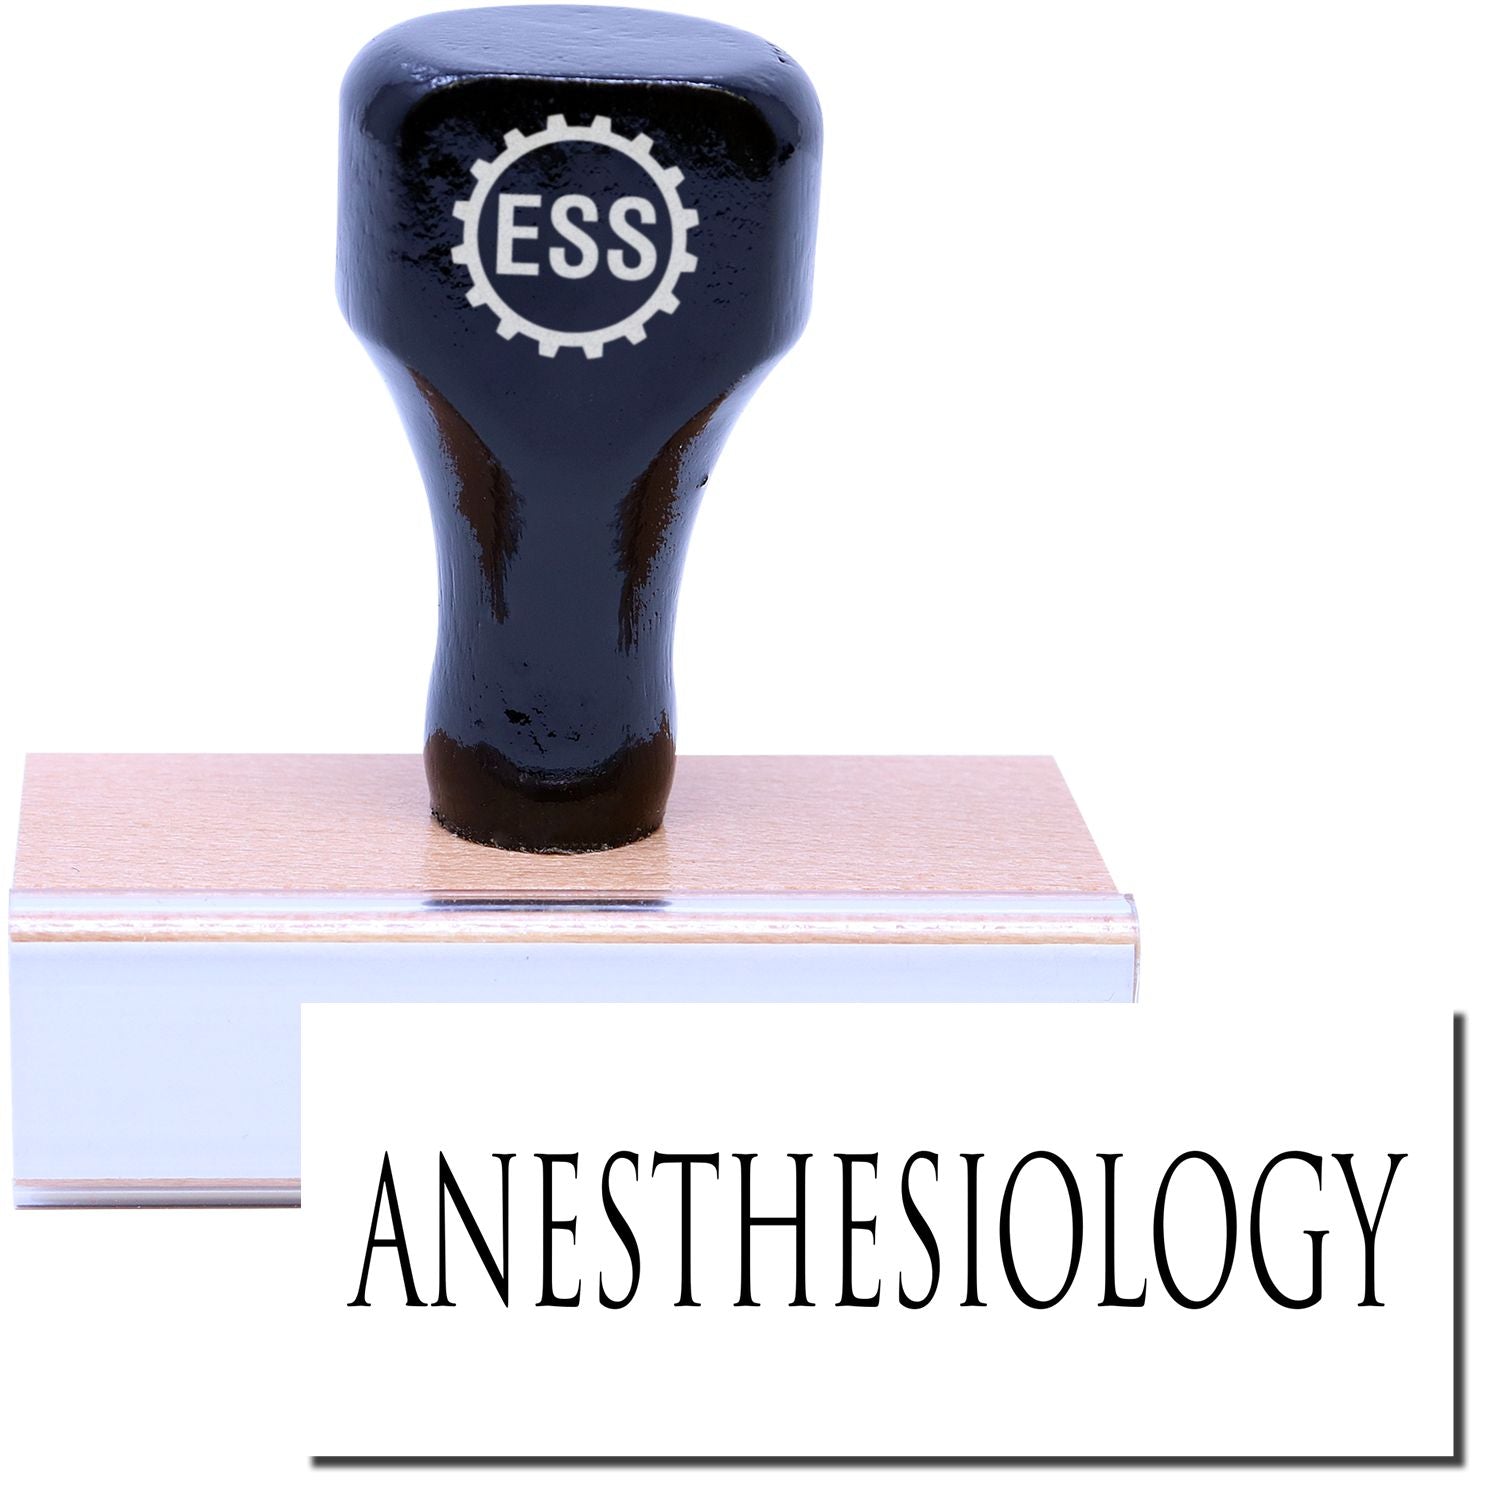 A stock office medical rubber stamp with a stamped image showing how the text "ANESTHESIOLOGY" is displayed after stamping.